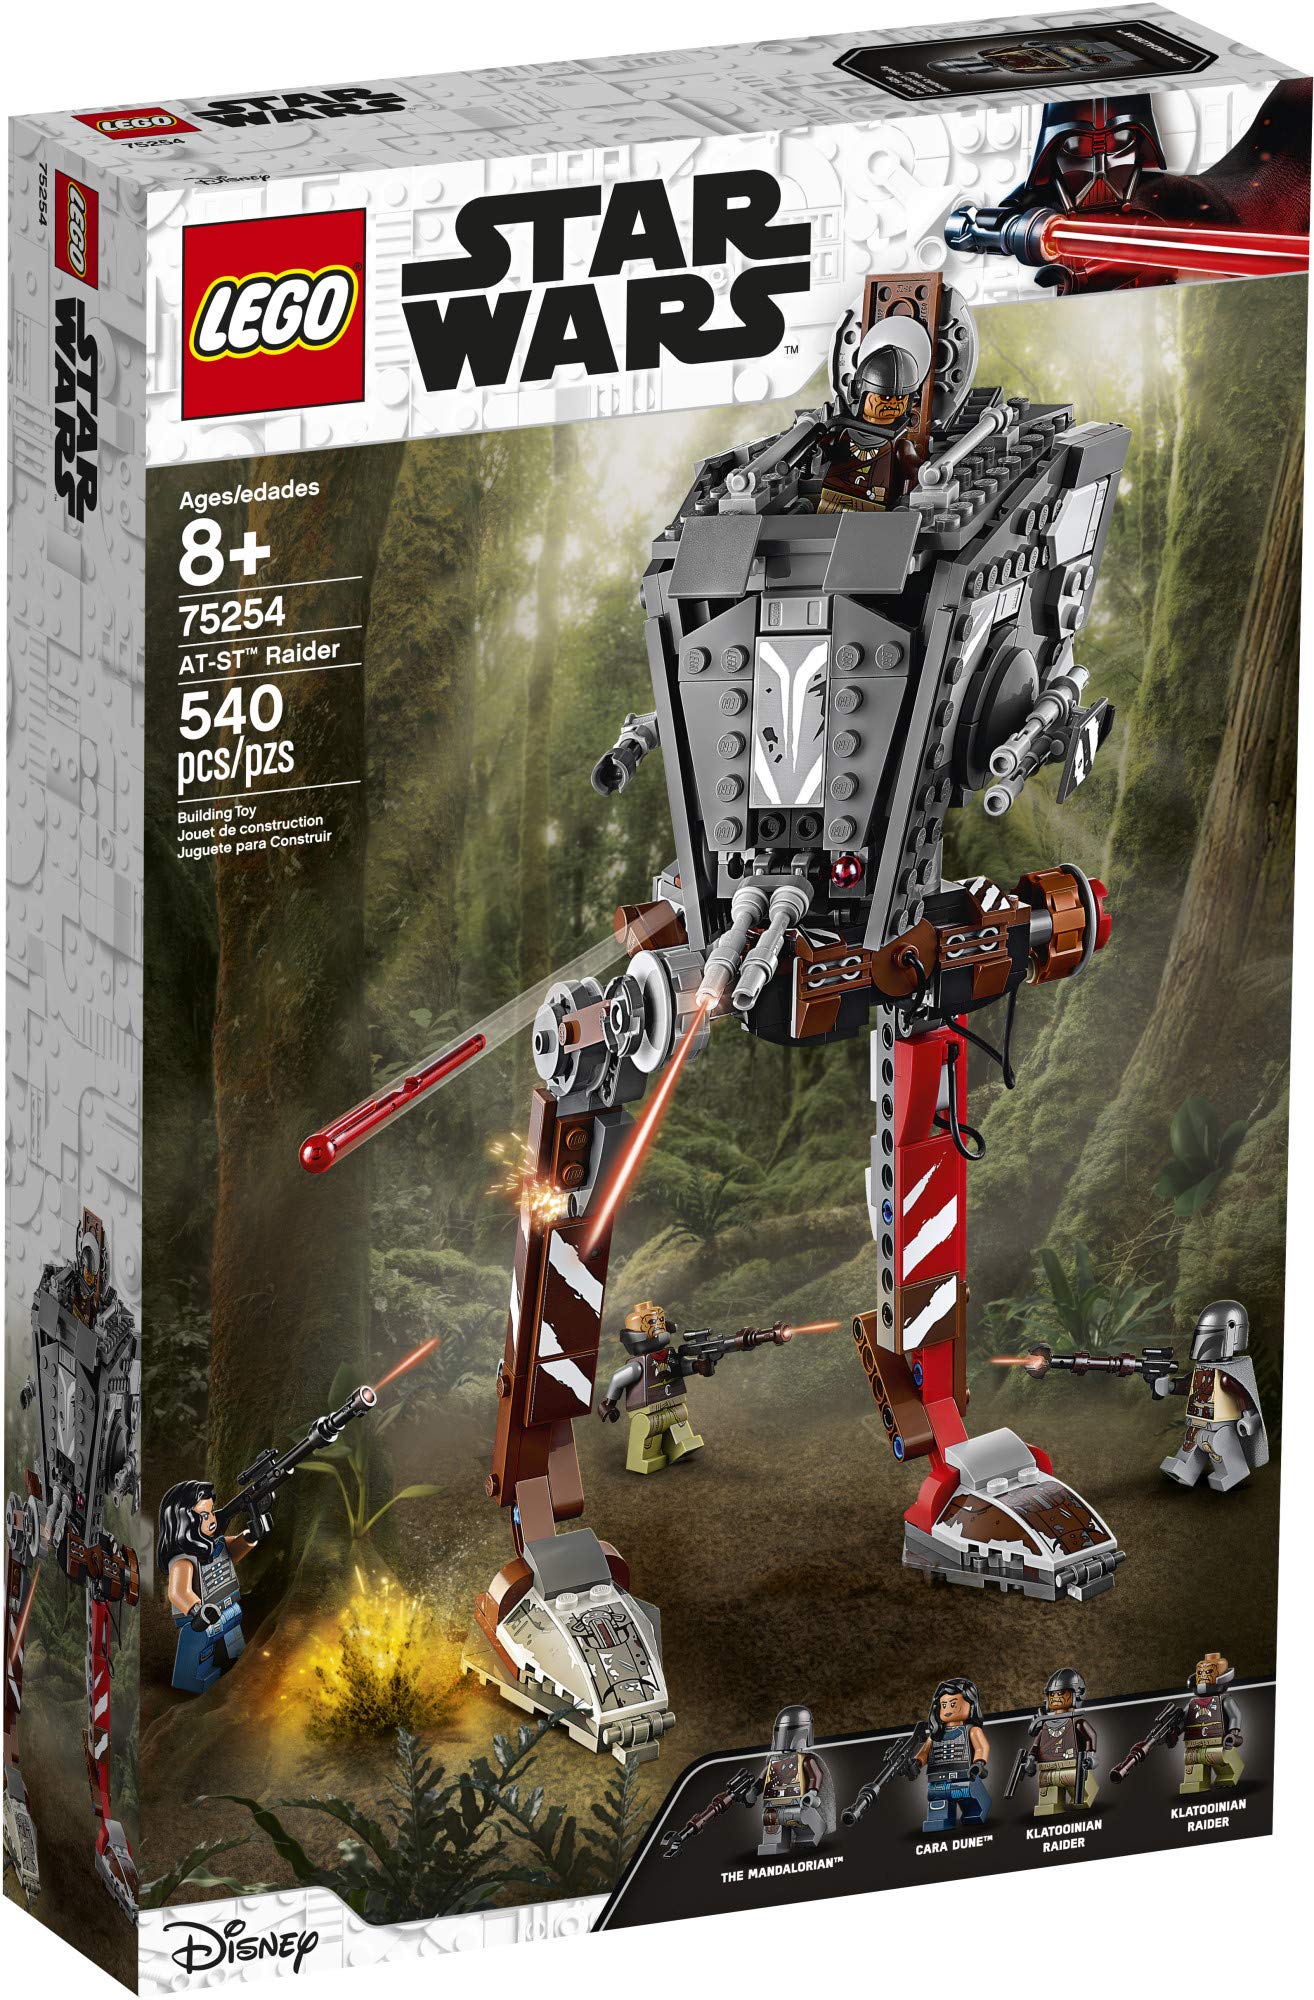 LEGO Star Wars at-ST Raider 75254 The Mandalorian Collectible All Terrain Scout Transport Walker Posable Building Model (540 Pieces)